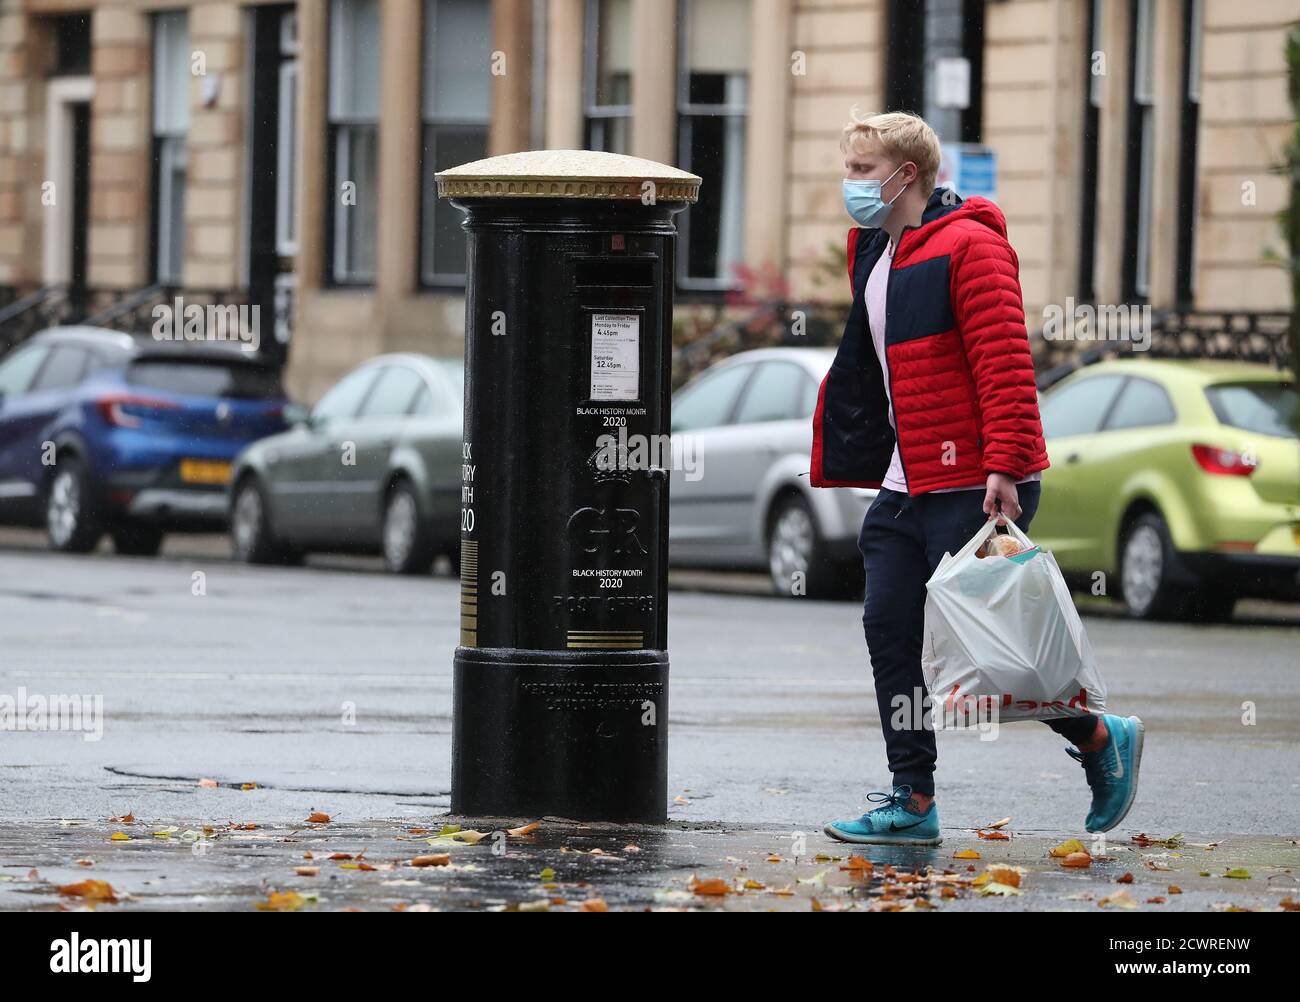 A member of the public walks past a black postbox featuring an image of Second Lieutenant Walter Tull, on Byres Road, Glasgow, one of four special edition postboxes unveiled by Royal Mail to mark Black History Month. Stock Photo